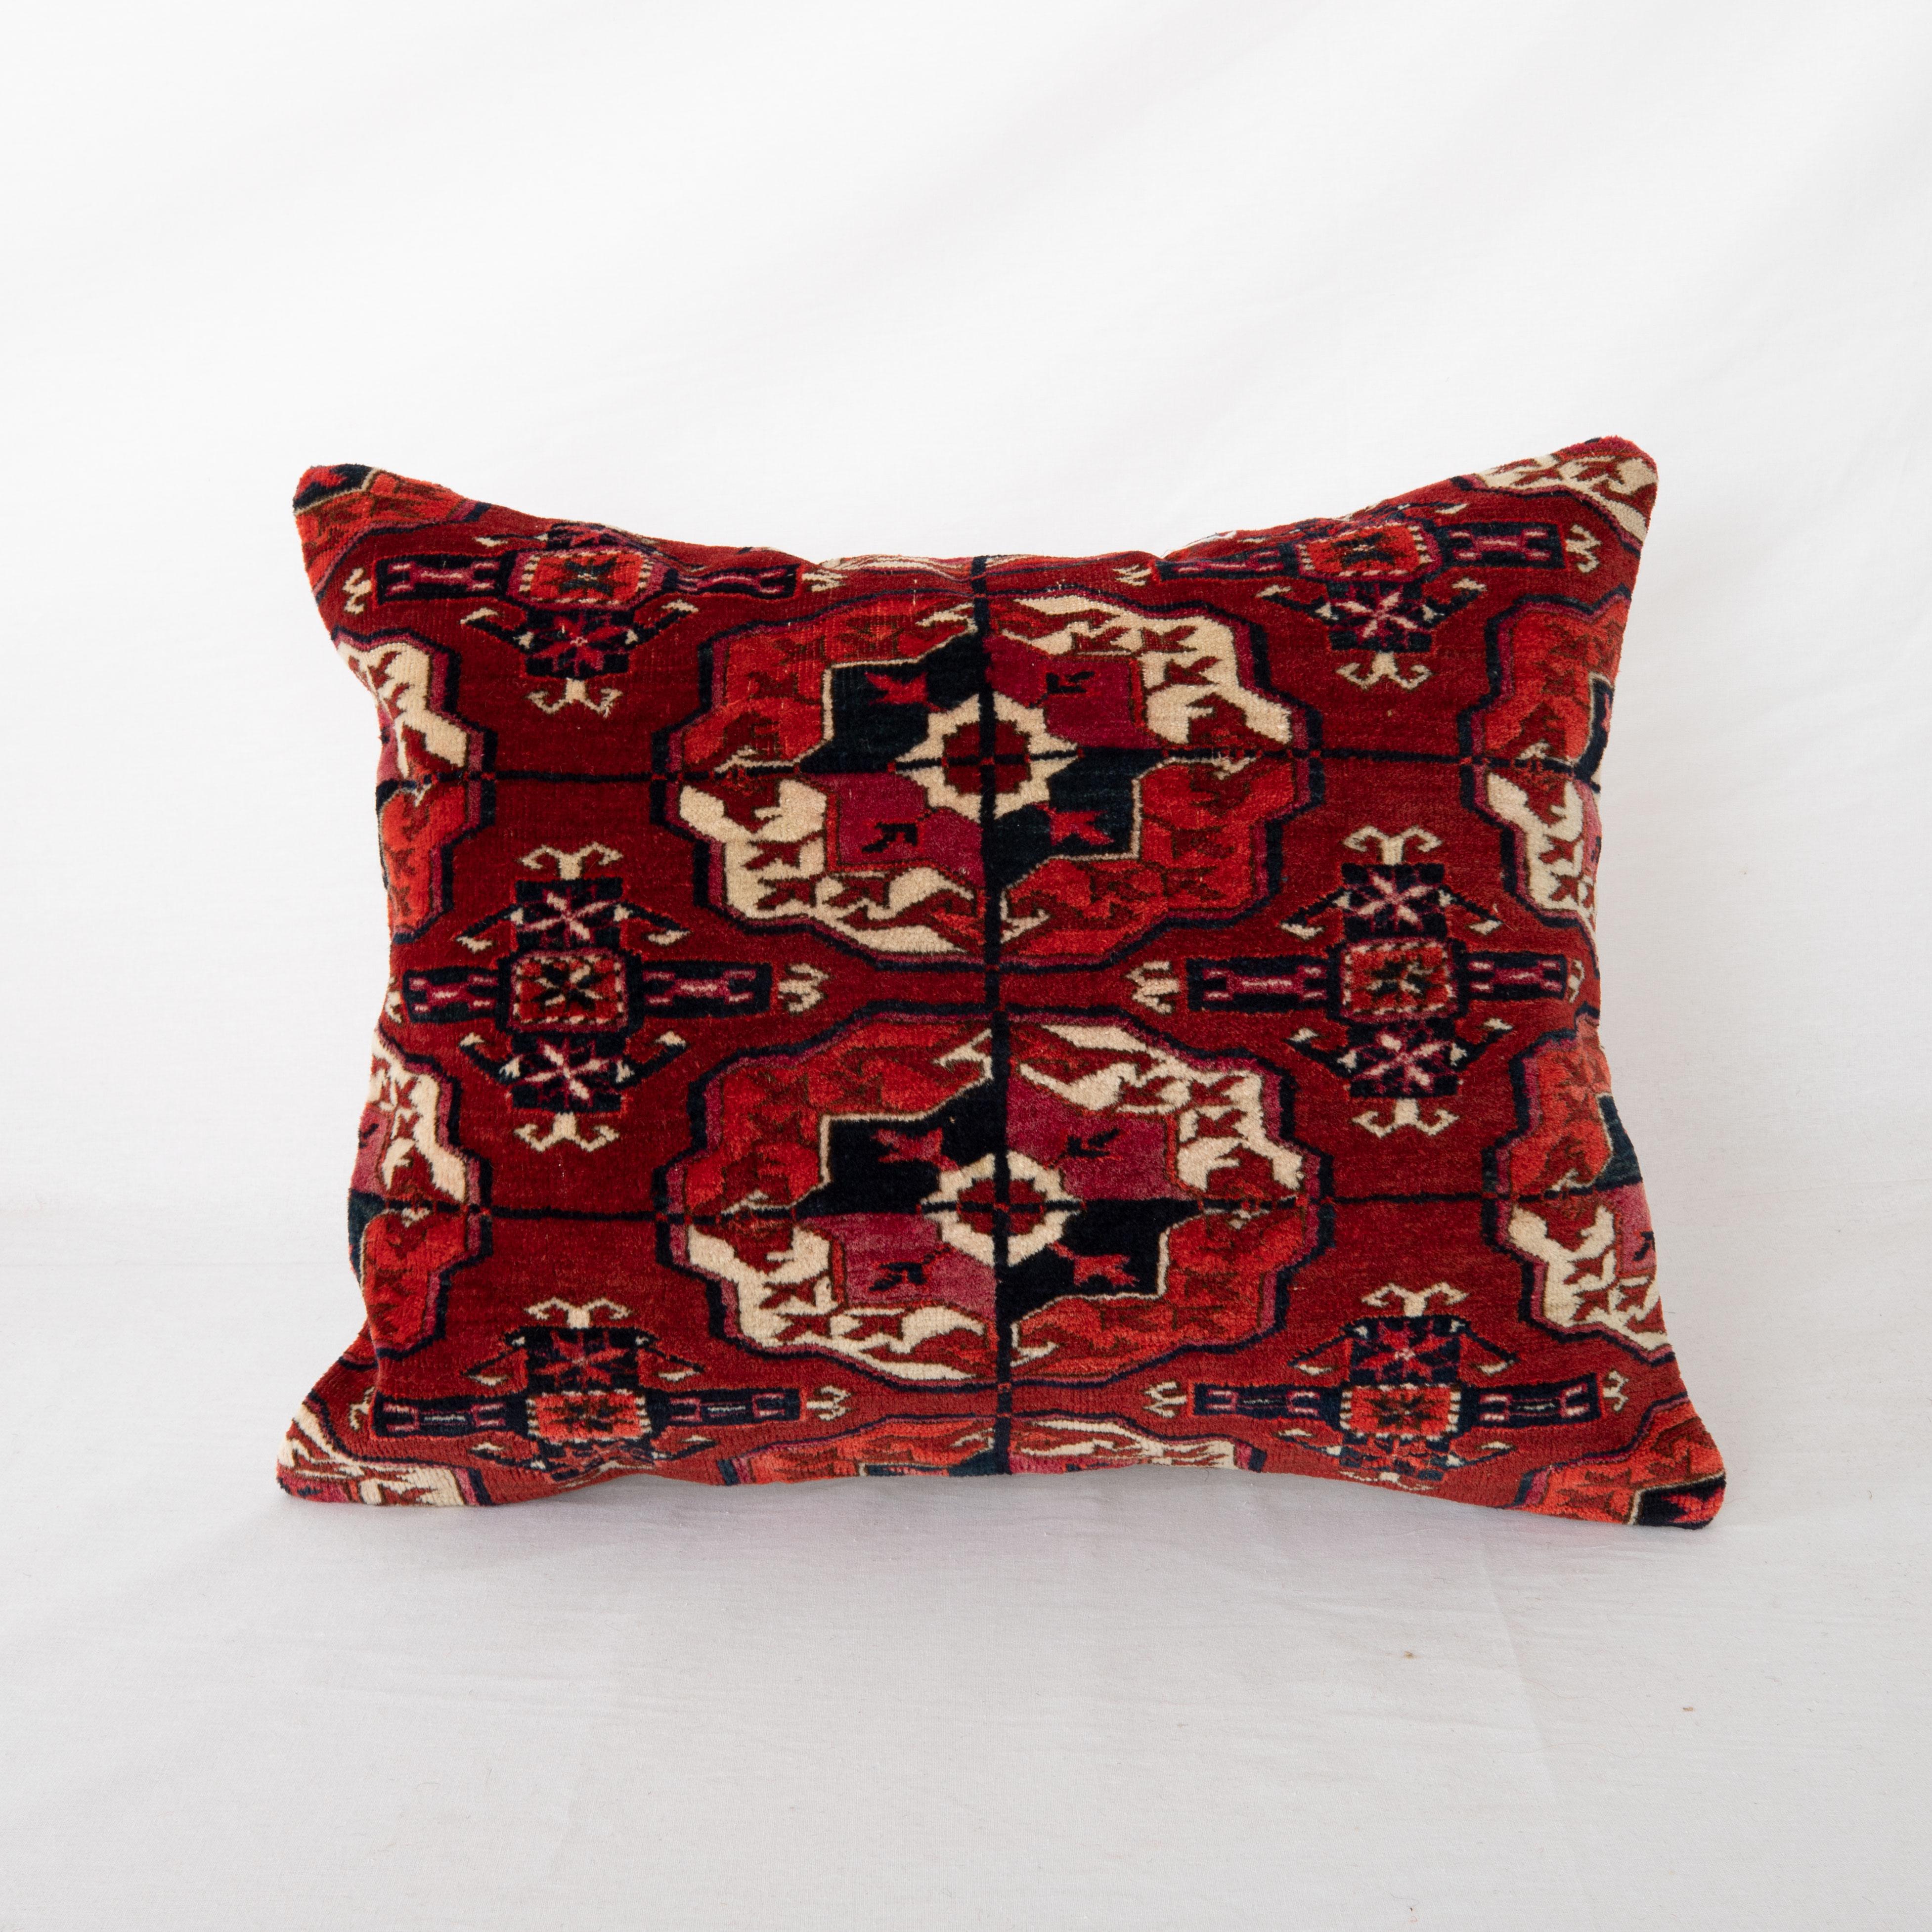 Pillowcase is made from an antique Turkmen, Tekke tribe main rug fragment dating back to 1860s.

It does not come with an insert but a bag made to size to accommodate insert materials.
Linen in the back.
Zipper Closure.
Dry Clean is